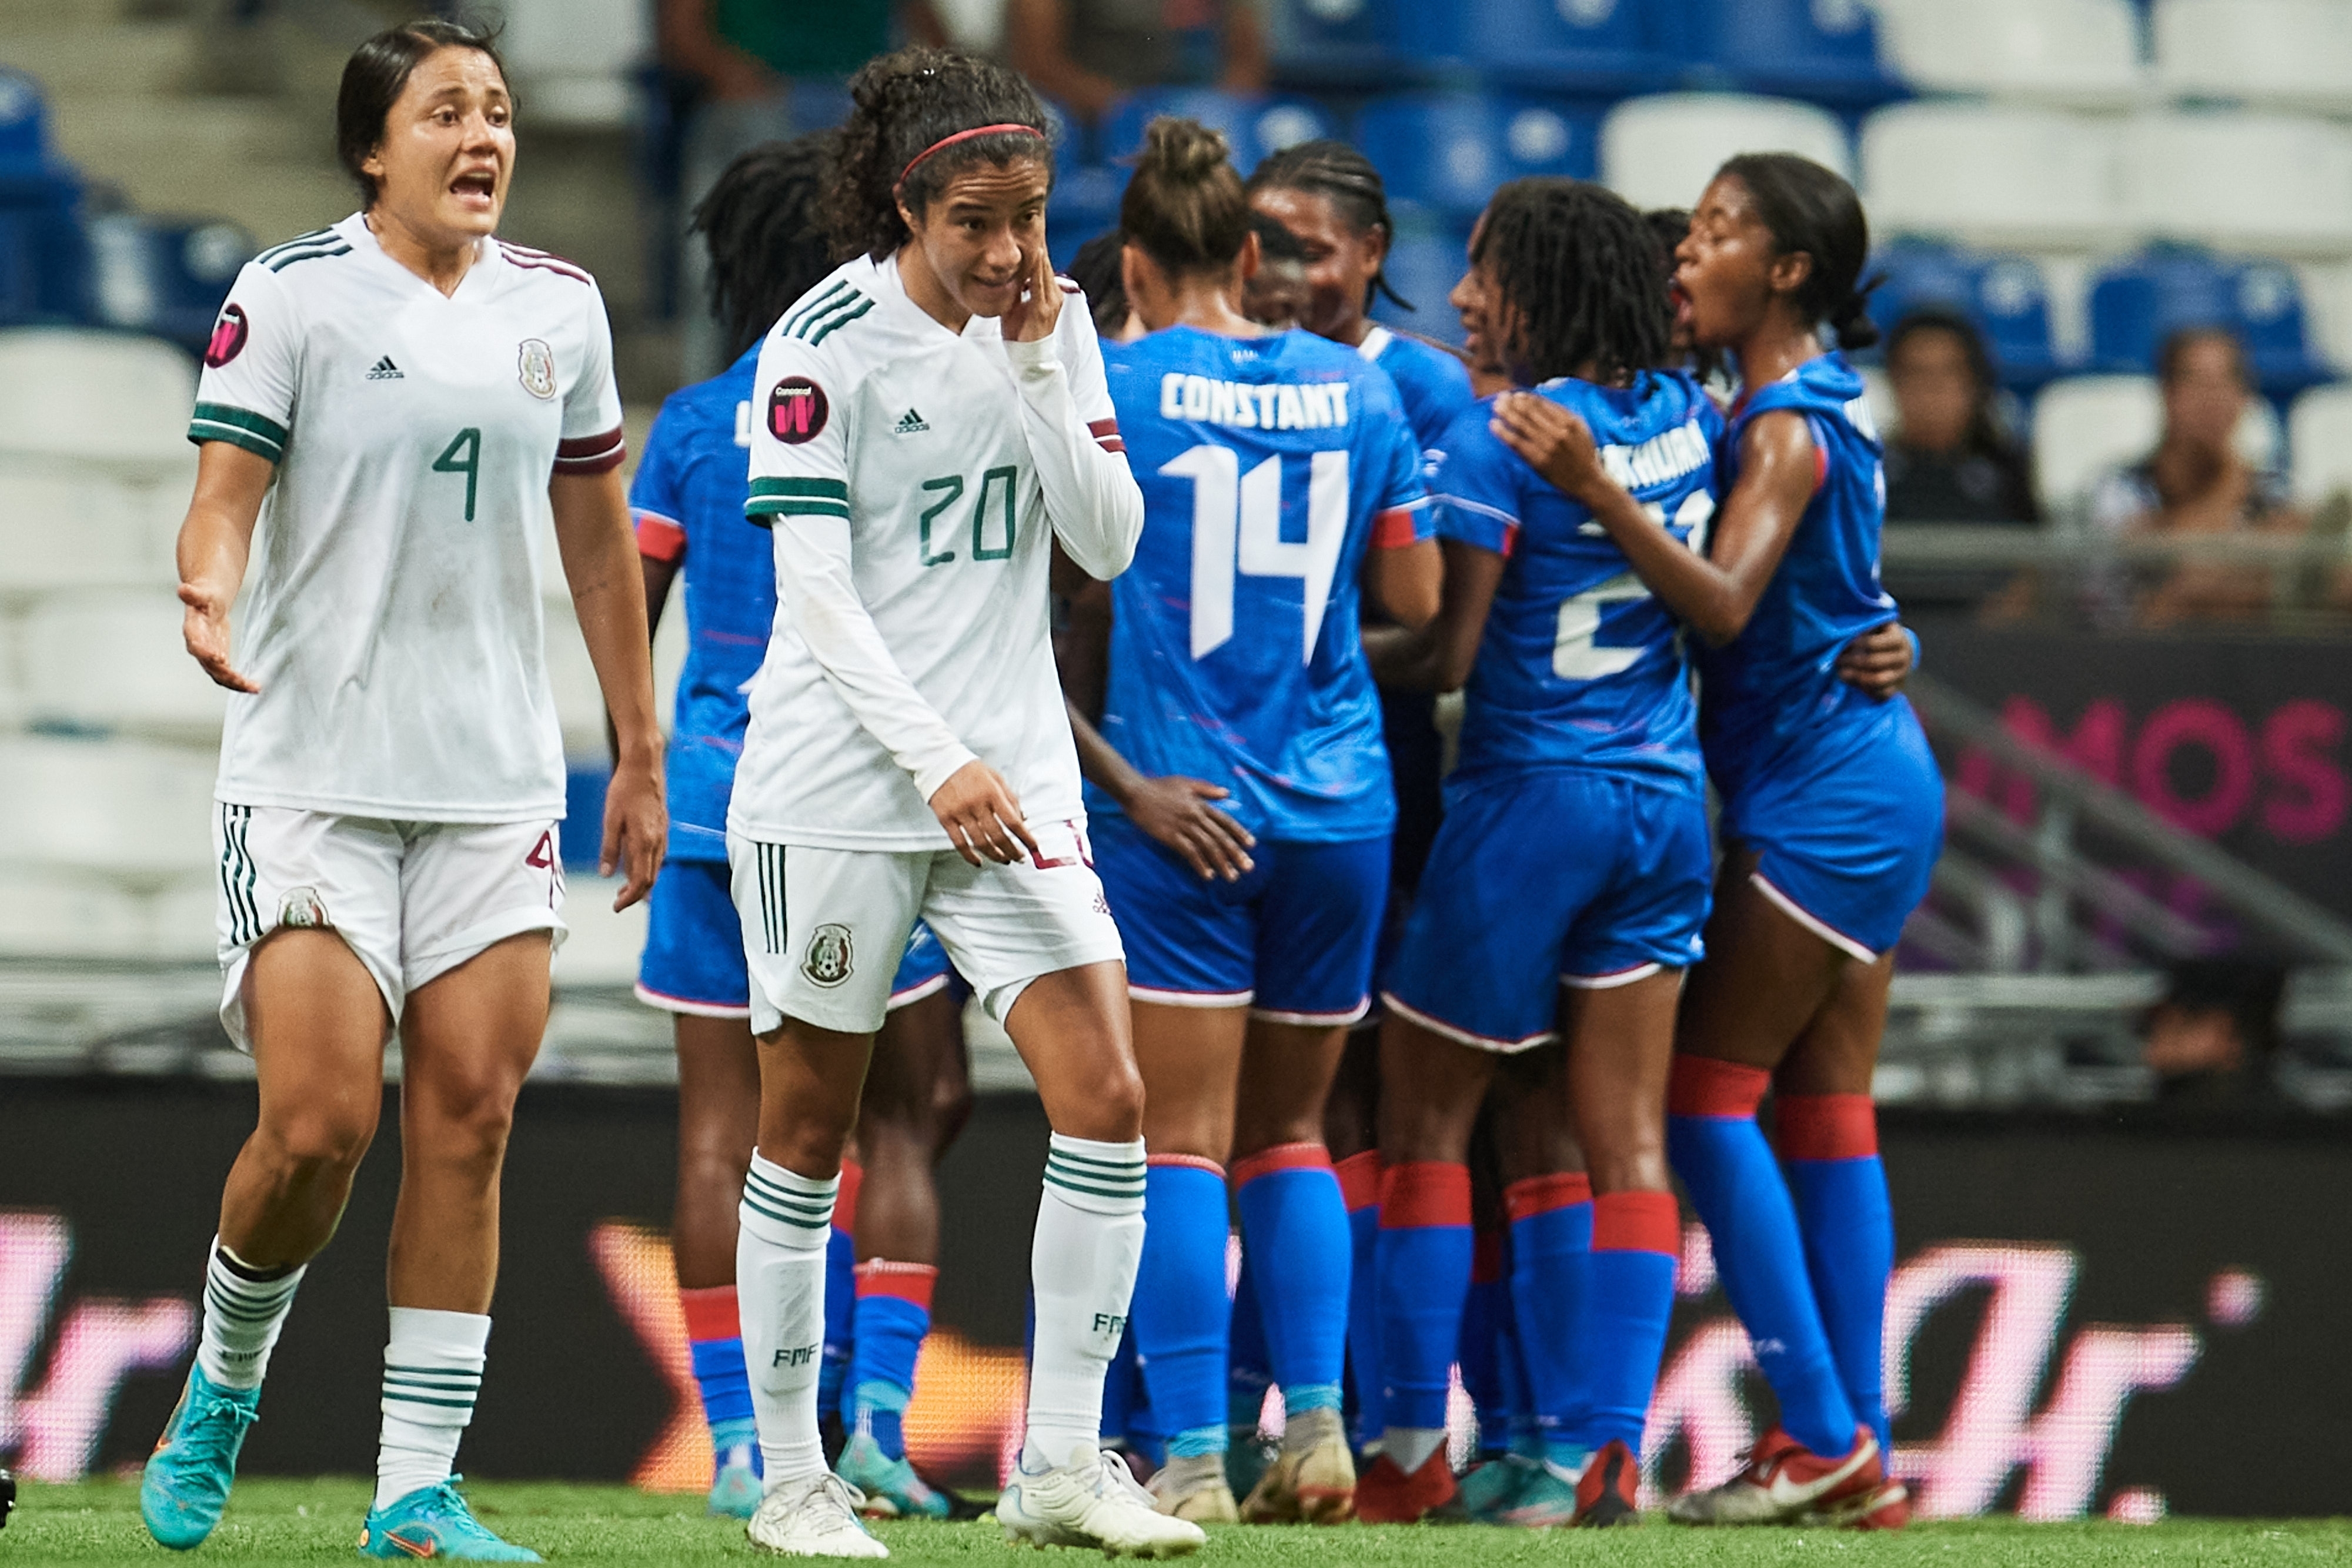 Claire Constant and her teammates from Haiti celebrate after scoring against Mexico at Estadio BBVA Bancomer on July 7, 2022.